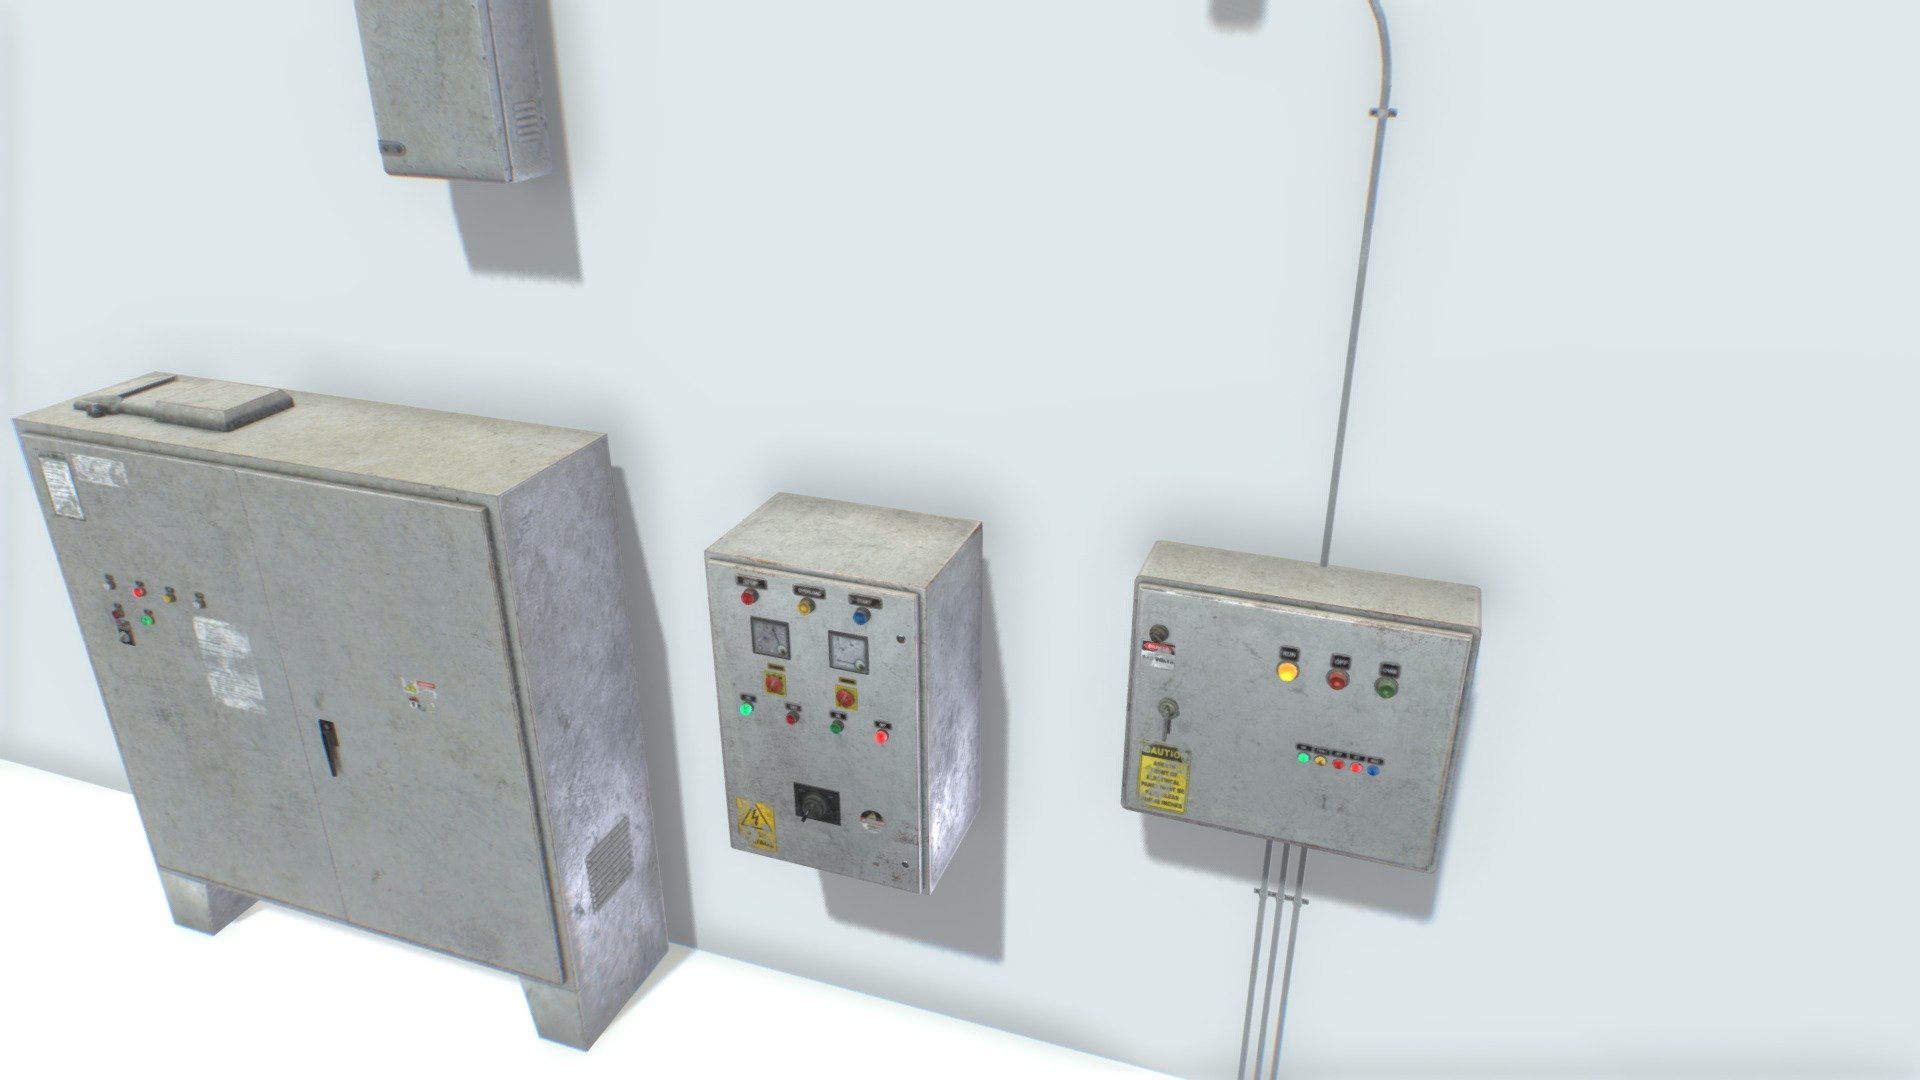 Set of old and rusty control panels based in real ones. Real scale. Comes with 4096x PBR textures including Albedo, Normal, Emissive, Metalness, Roughness and AO. Emissive texture with some lights on.

4 control panels, 1 small electric box and electric tubes.

Panels comes with 2000 to 2800 tris. Total triangles 10000 3d model